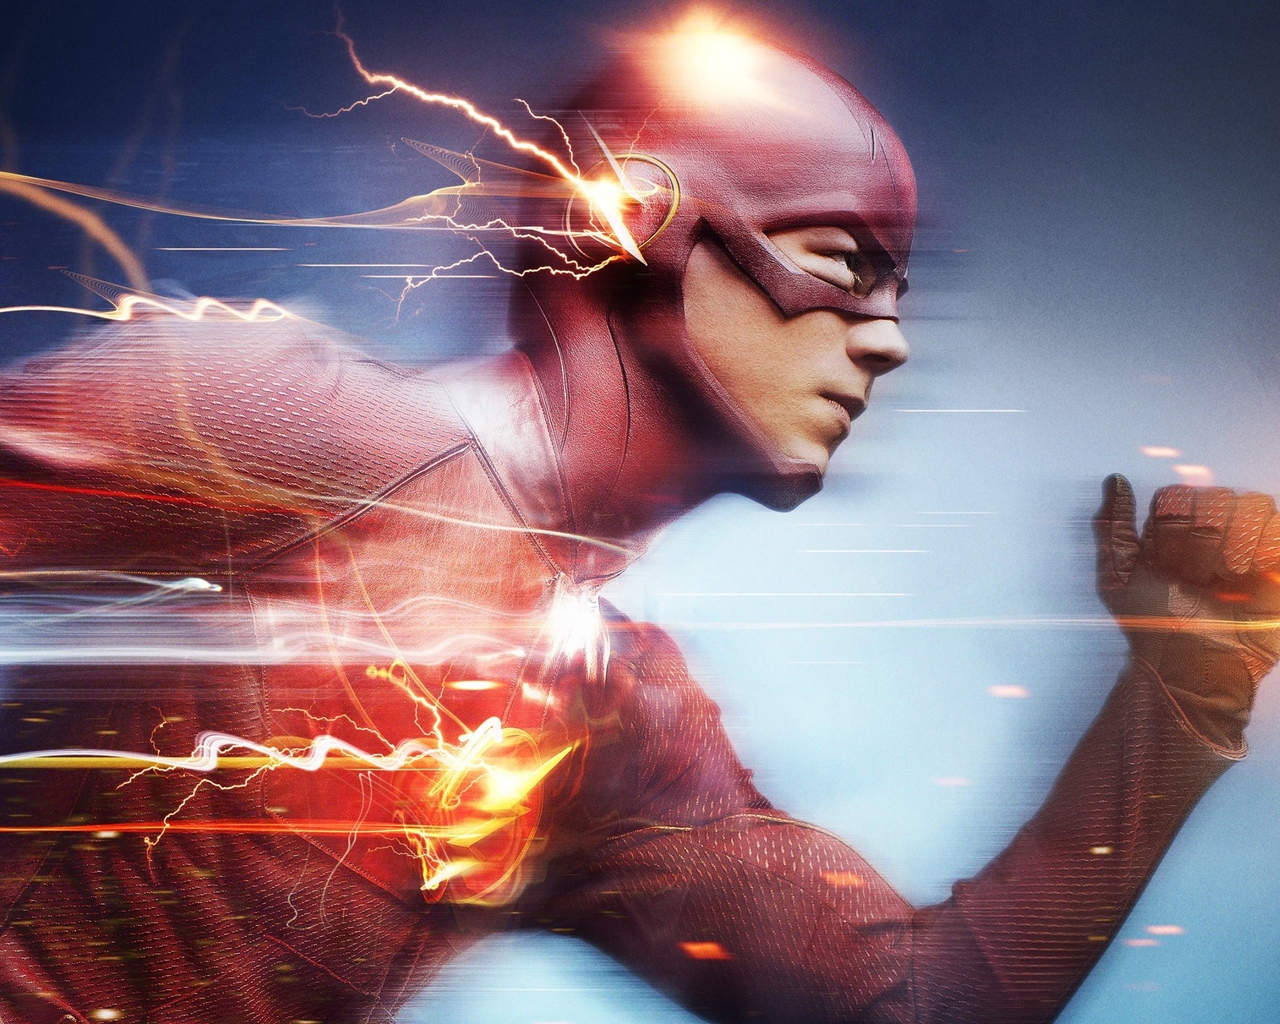 Barry Allen The Flash for 1280 x 1024 resolution